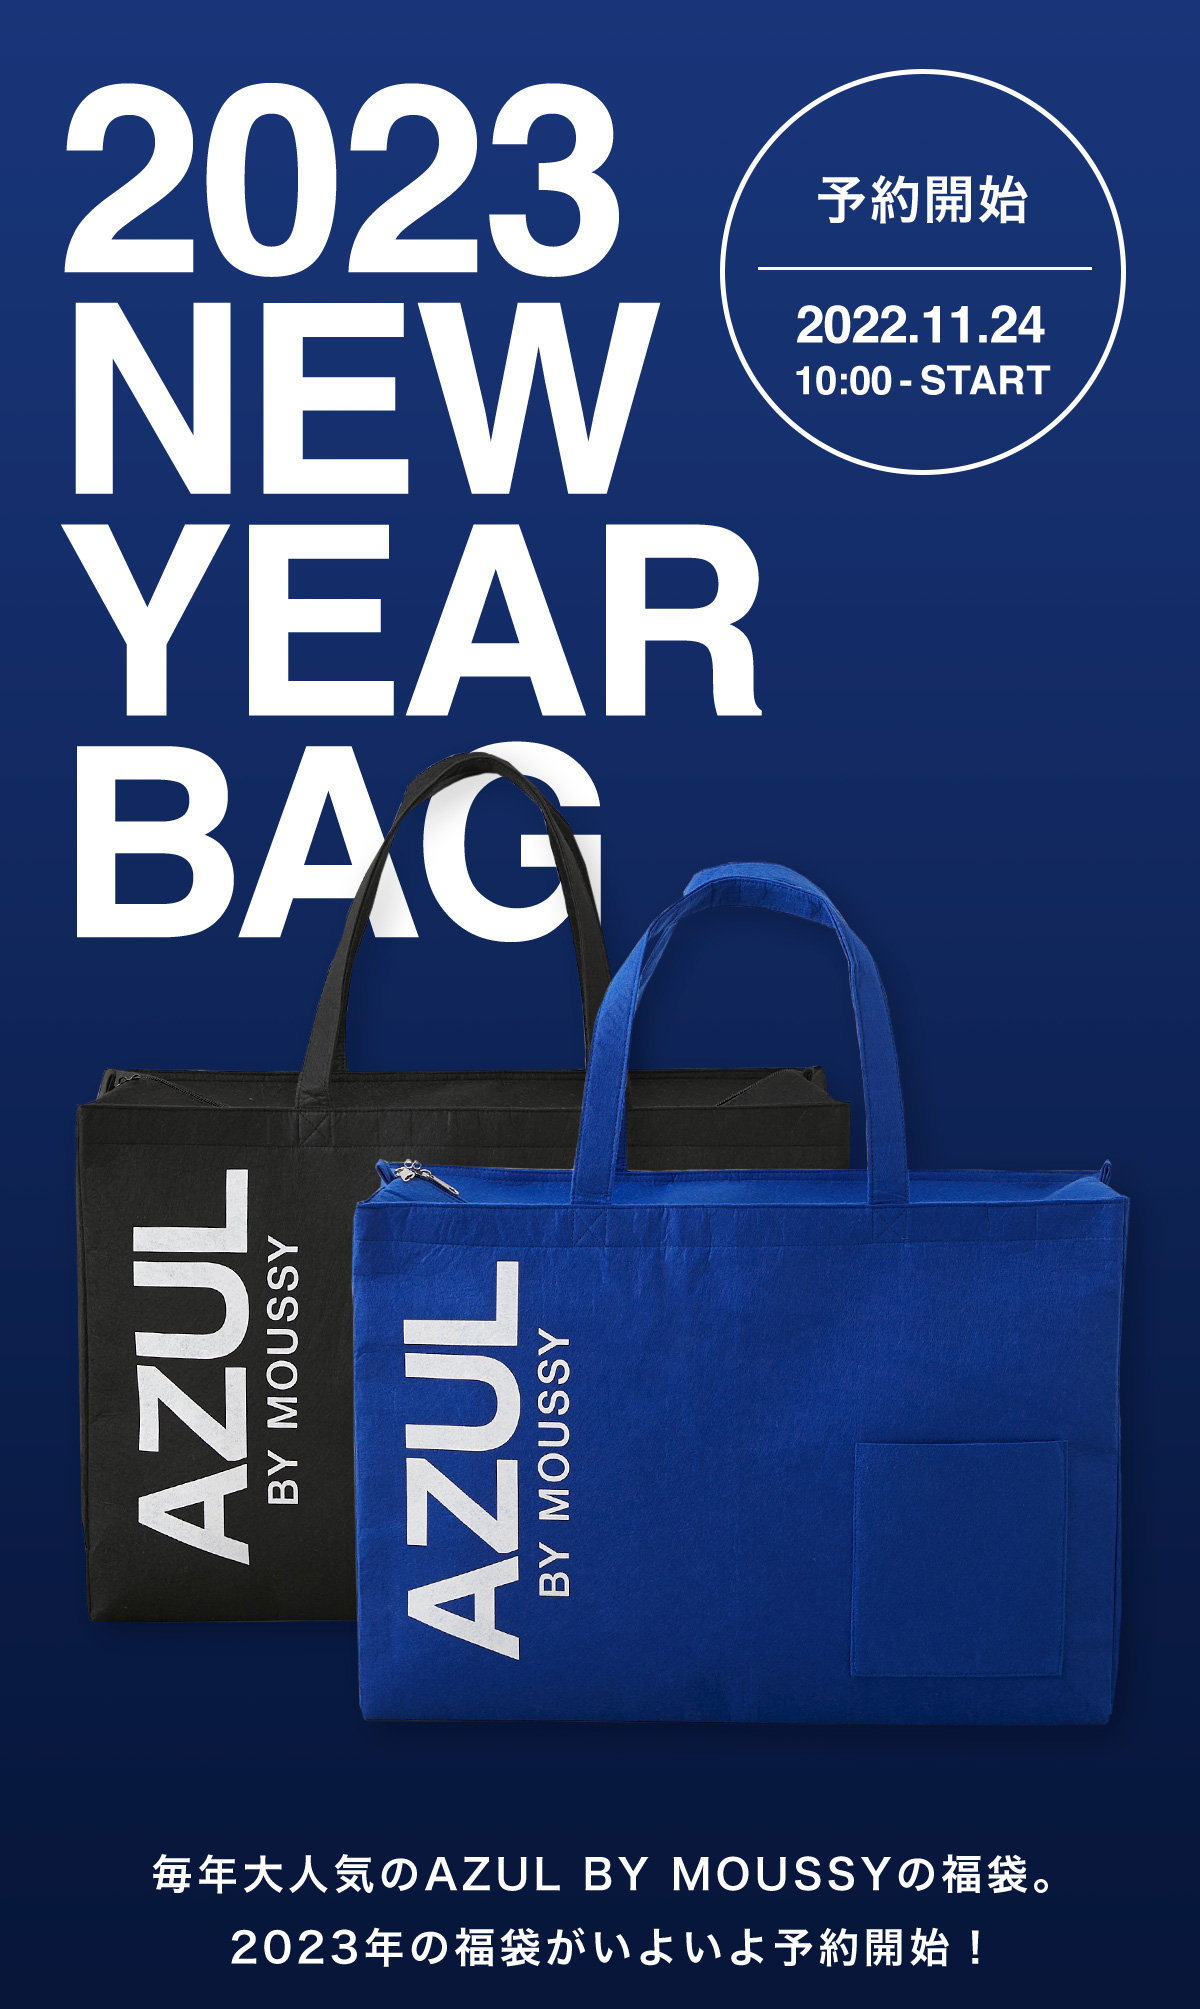 2023 NEW YEAR BAG｜特集コンテンツ｜AZUL BY MOUSSY（アズールバイマウジー）公式通販サイト